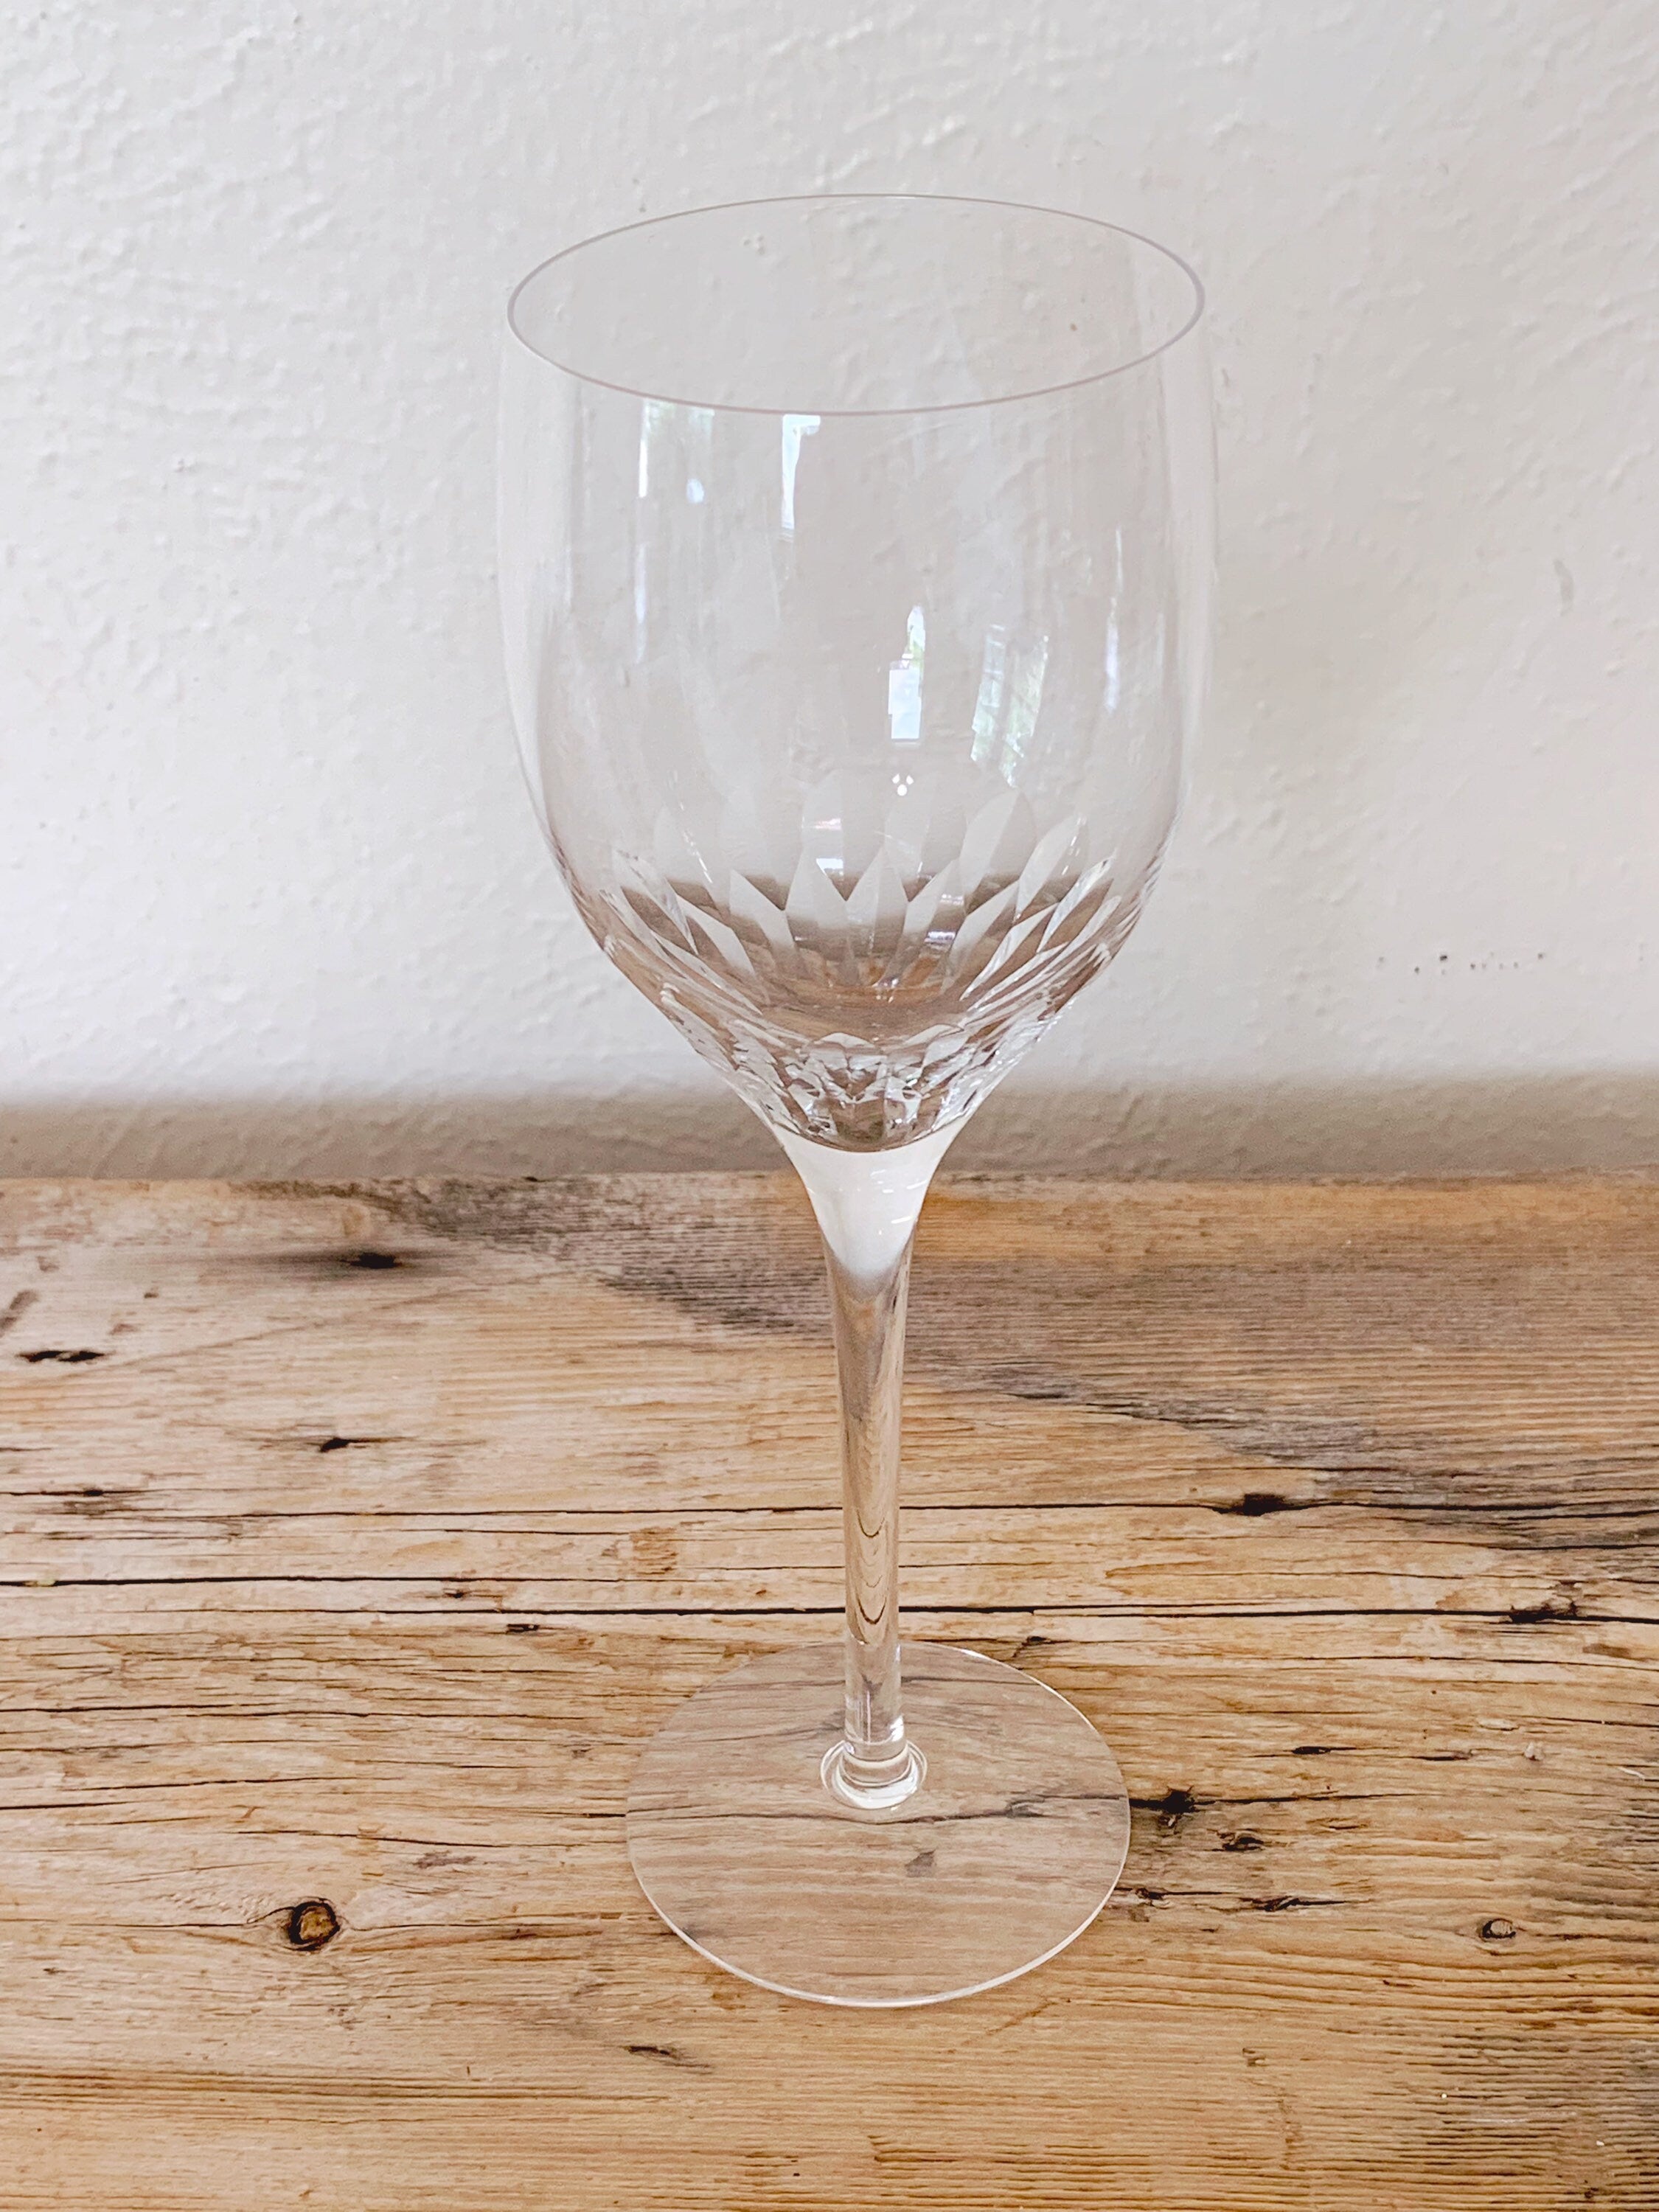 Pair of Vintage Thin Crystal Wine Glasses with Optic Design | Clear Crystal White Wine Glass Set of 2 | Wedding and Housewarming Gift